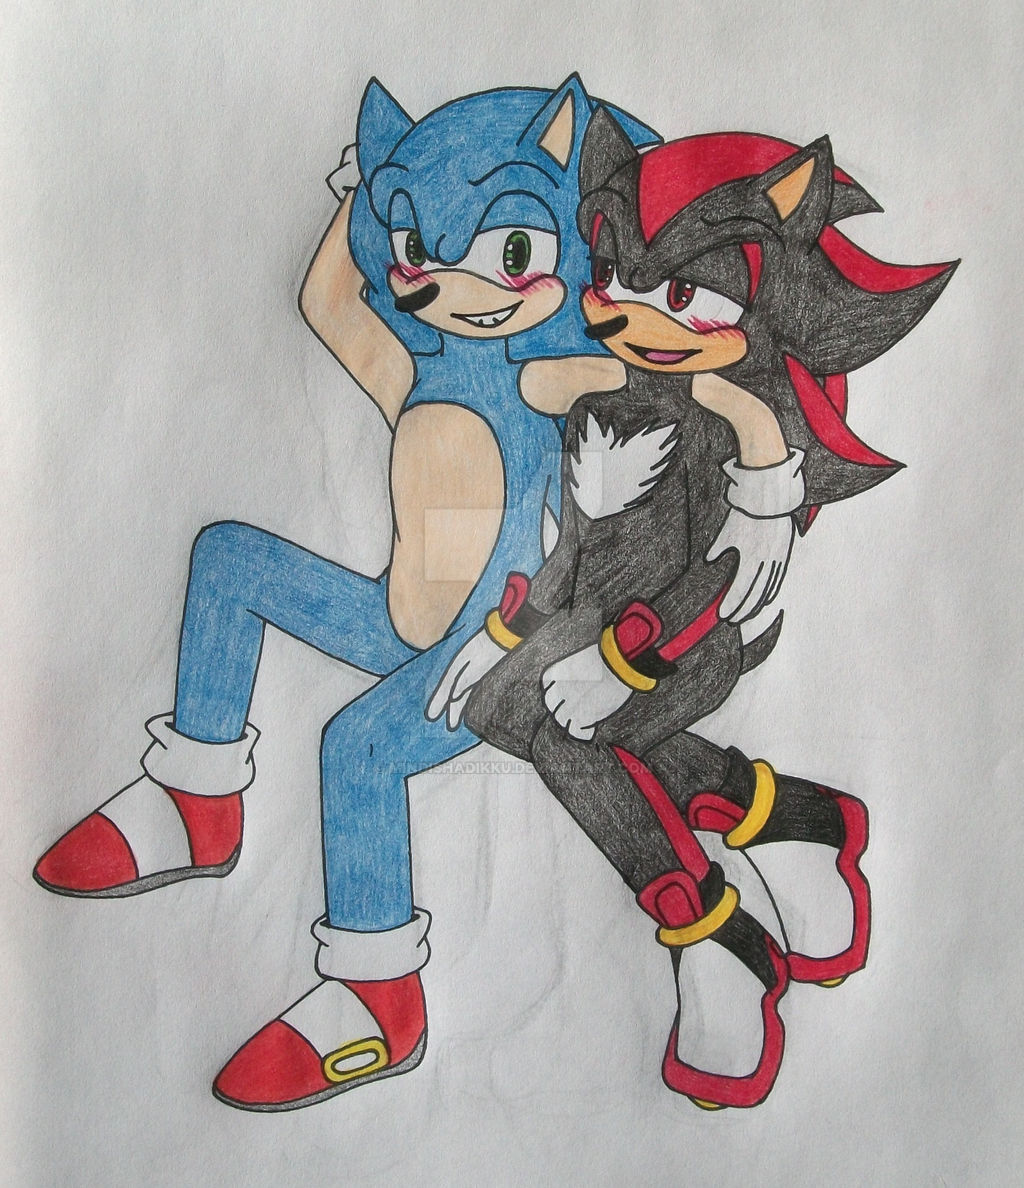 Sonadow When we meet each other again (FINISHED) - Pregnant or not